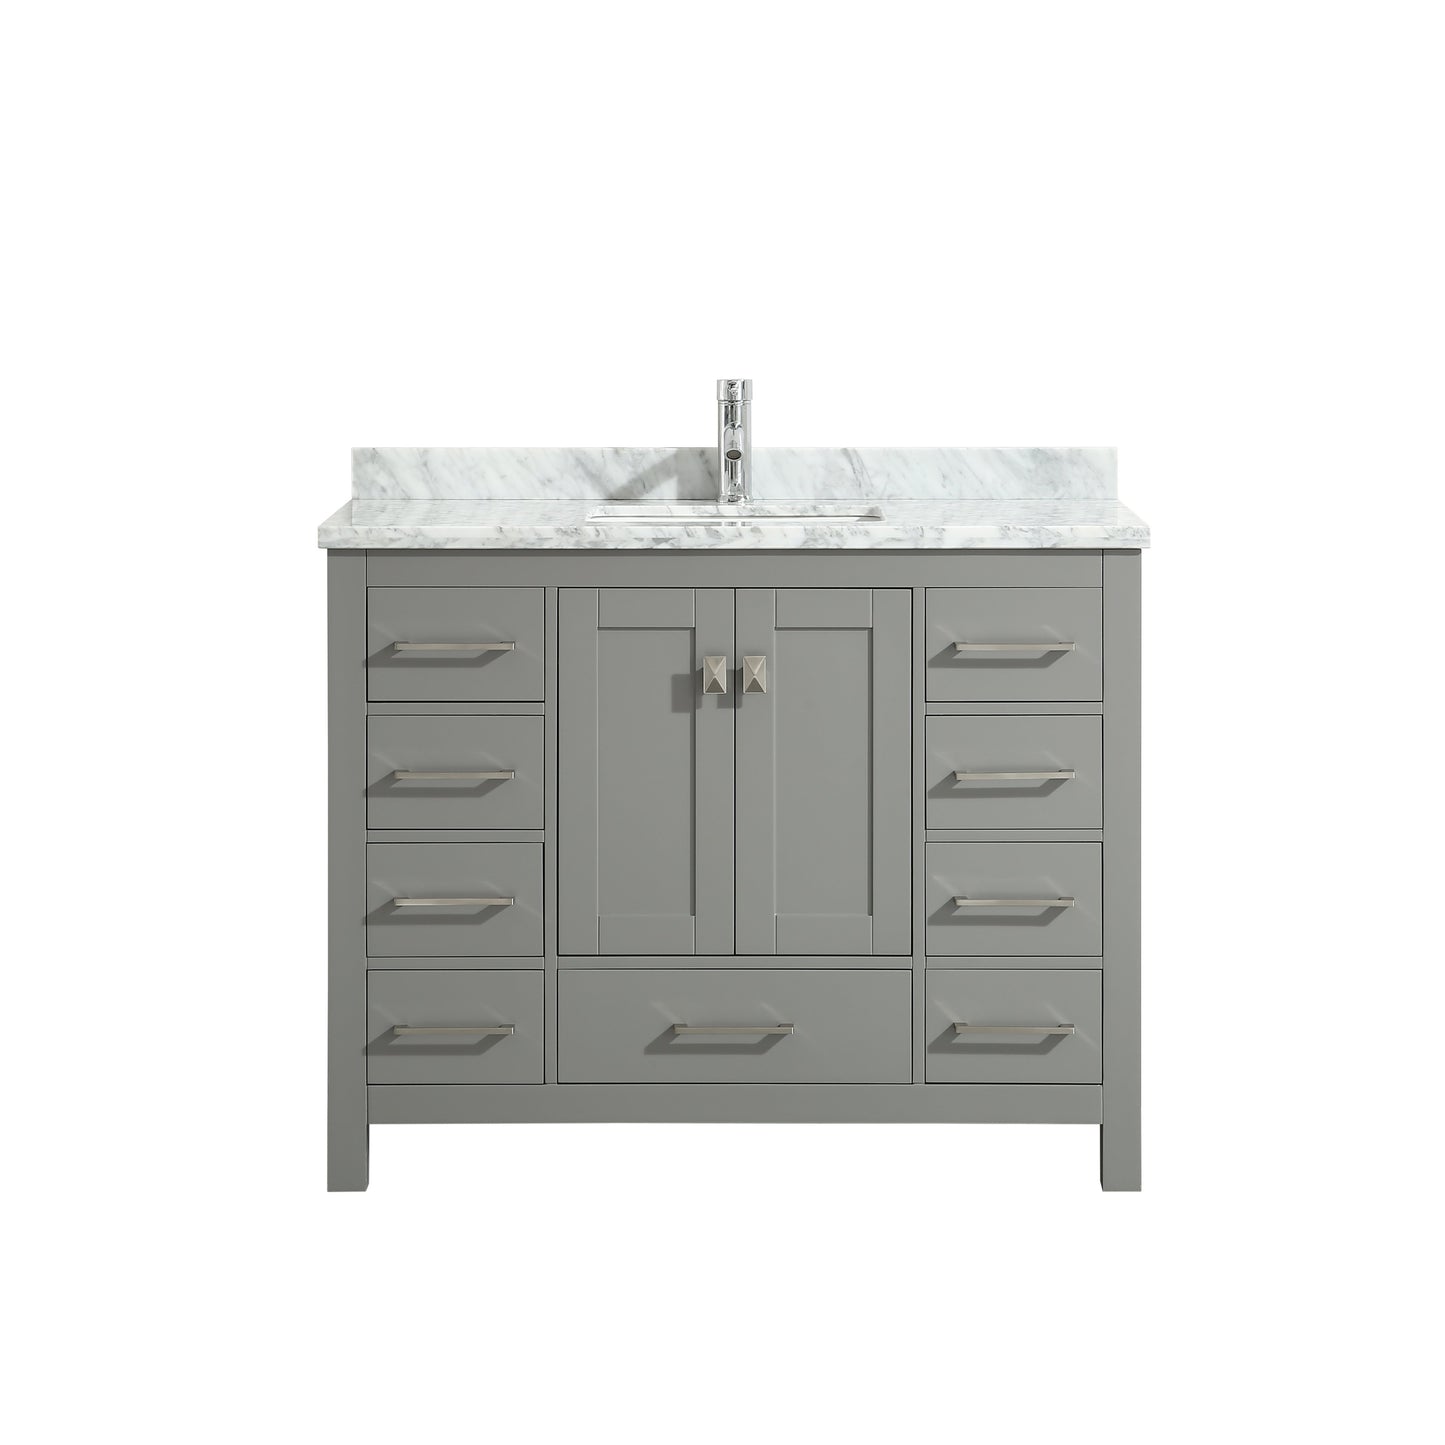 Eviva London 48" Transitional White bathroom vanity with white Carrara marble countertop - Luxe Bathroom Vanities Luxury Bathroom Fixtures Bathroom Furniture